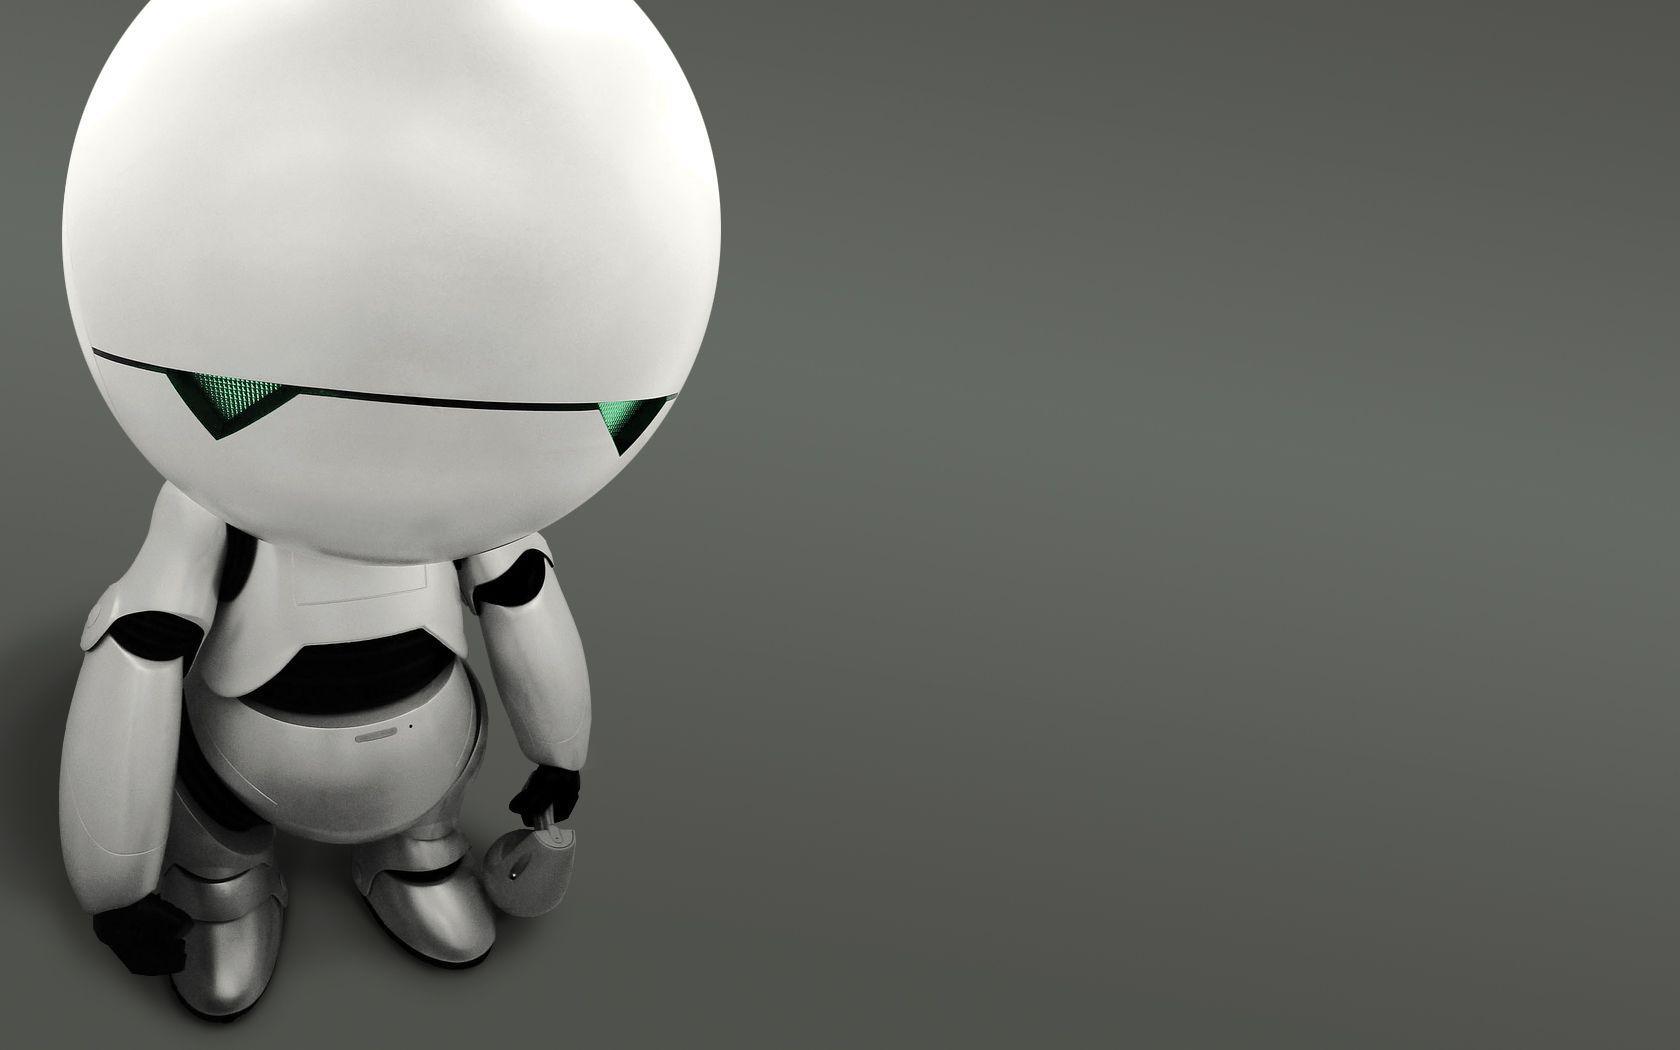 Download the Sad Lonely Robot Wallpaper, Sad Lonely Robot iPhone